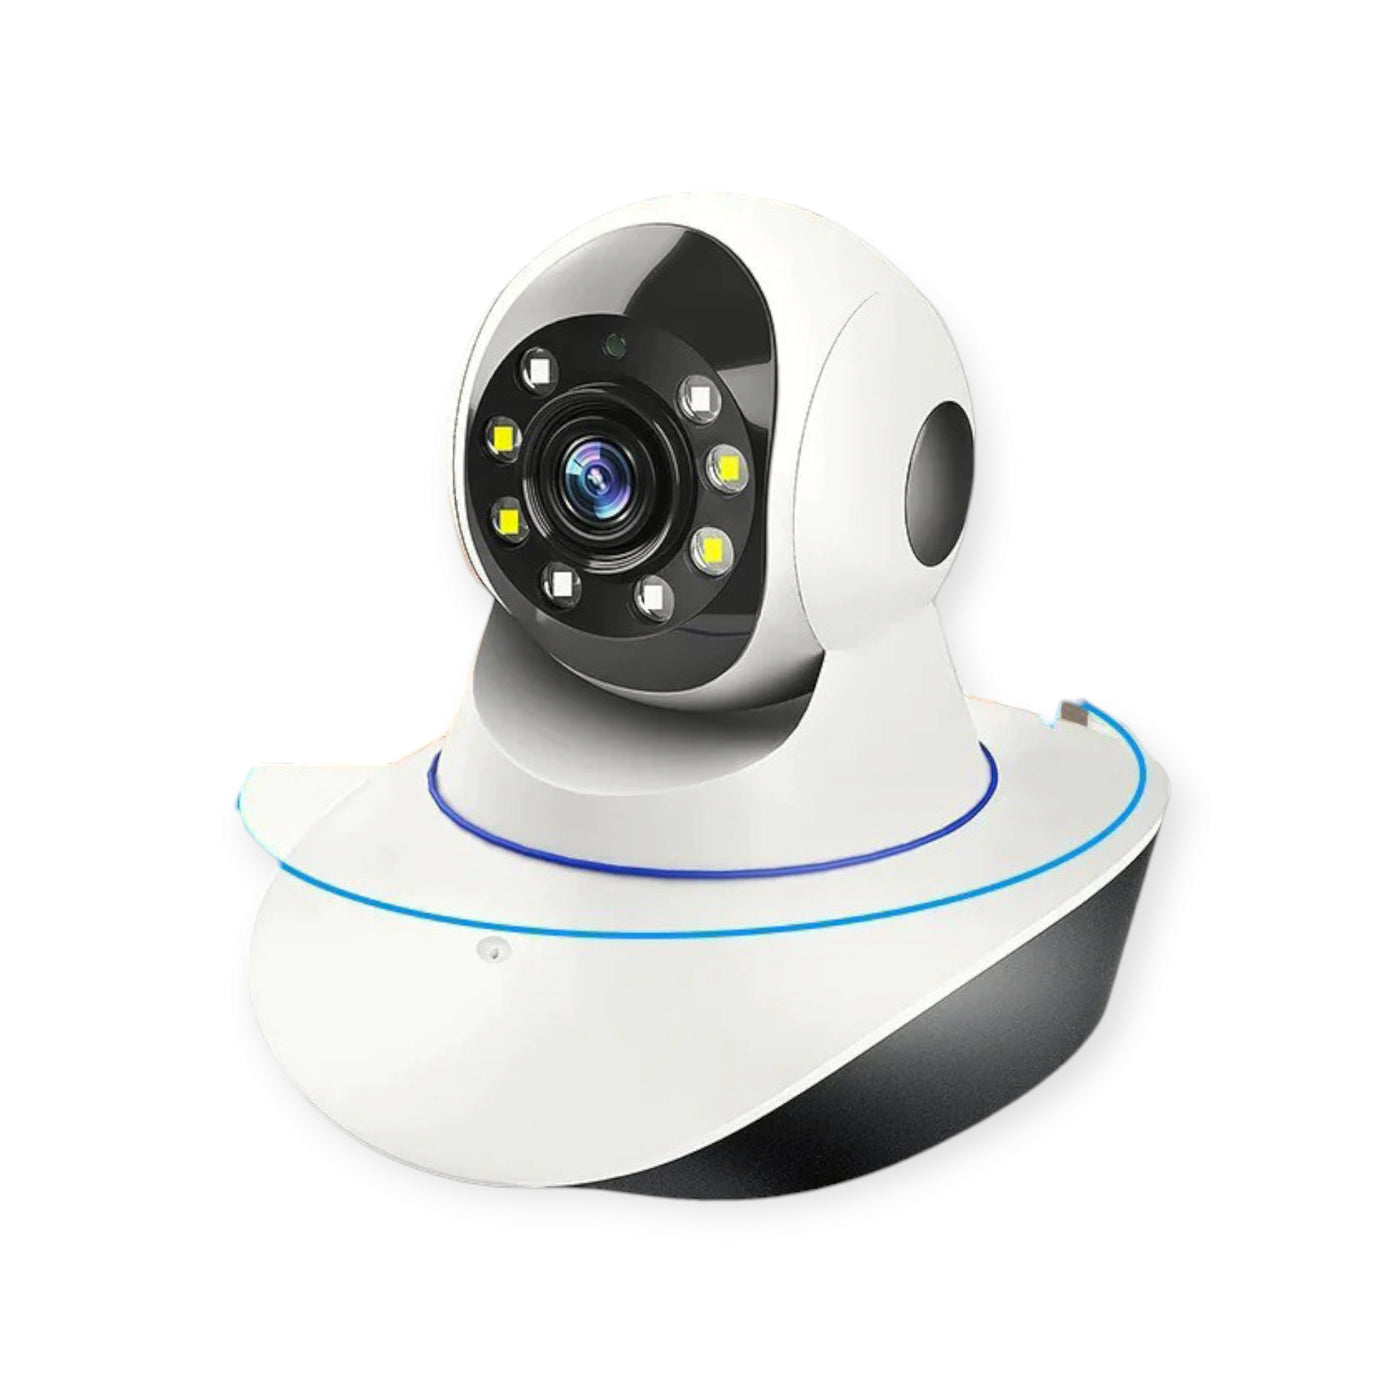 WiFi Ptz Night Color 1080p CameraExperience superior clarity and detail with this WiFi Ptz Night Color 1080p Camera. Get stunning Full HD resolution with vivid colors and improved low-light performaWiFi Ptz Night Color 1080p CameraZam Zam Store